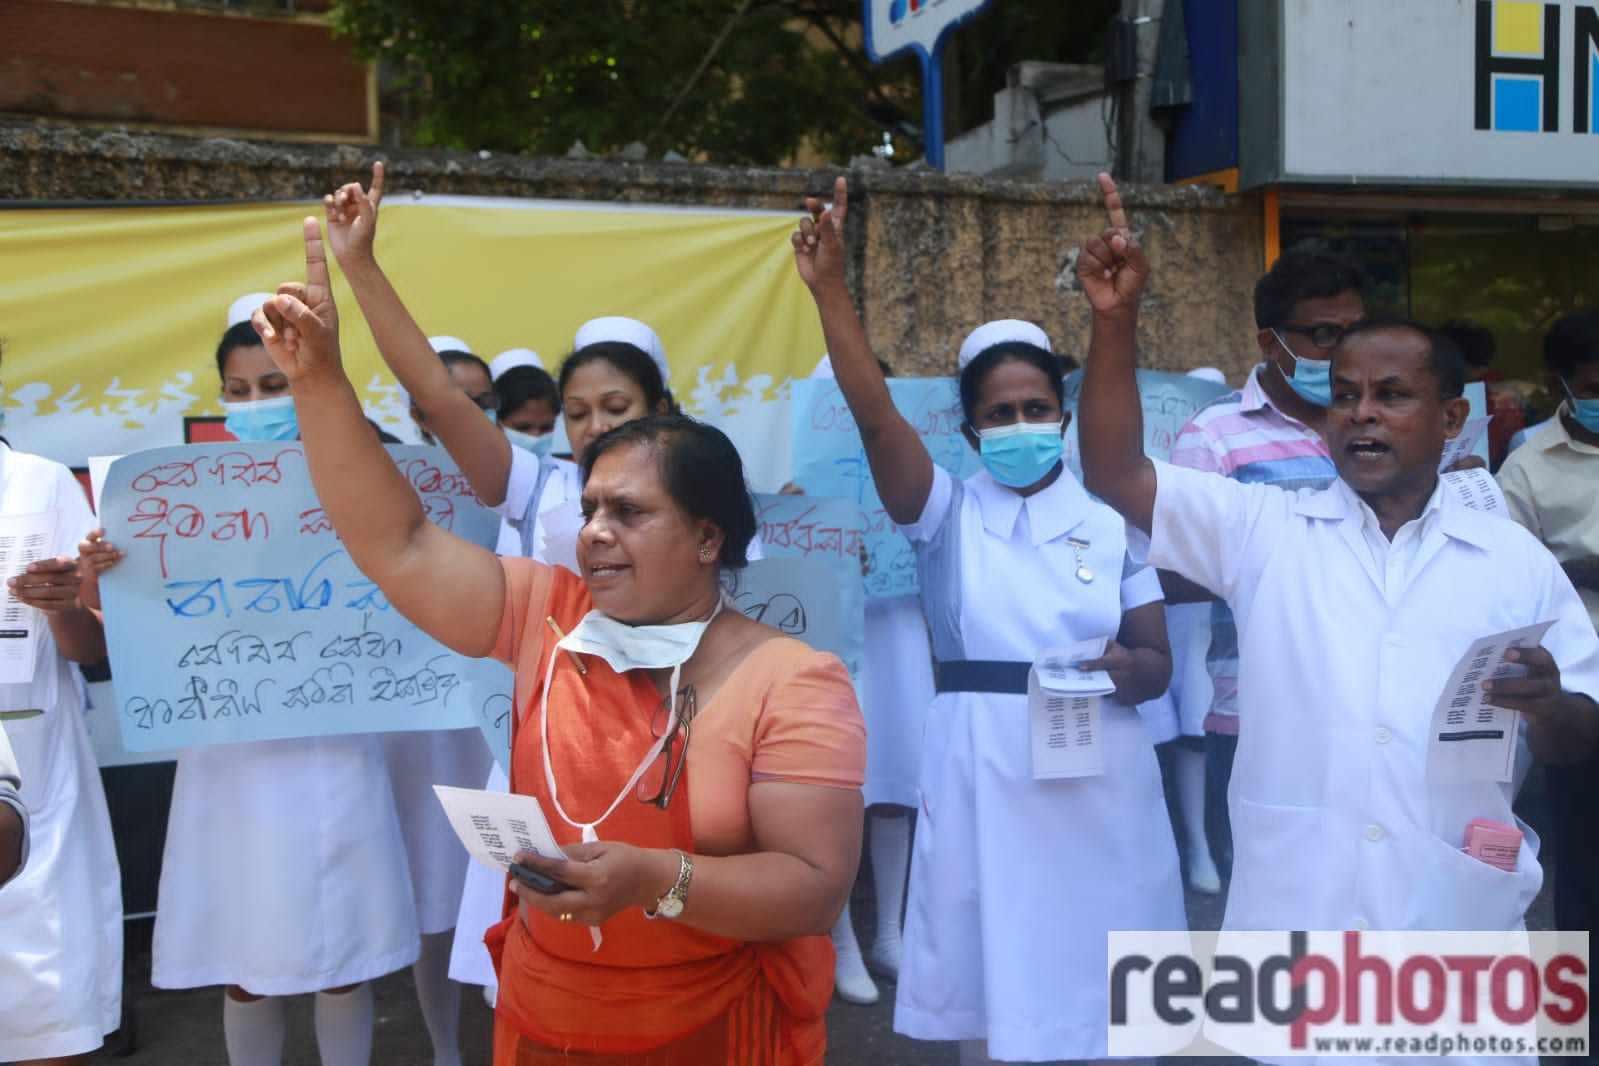 health workers protest in Colombo 2022/08/16 - Read Photos